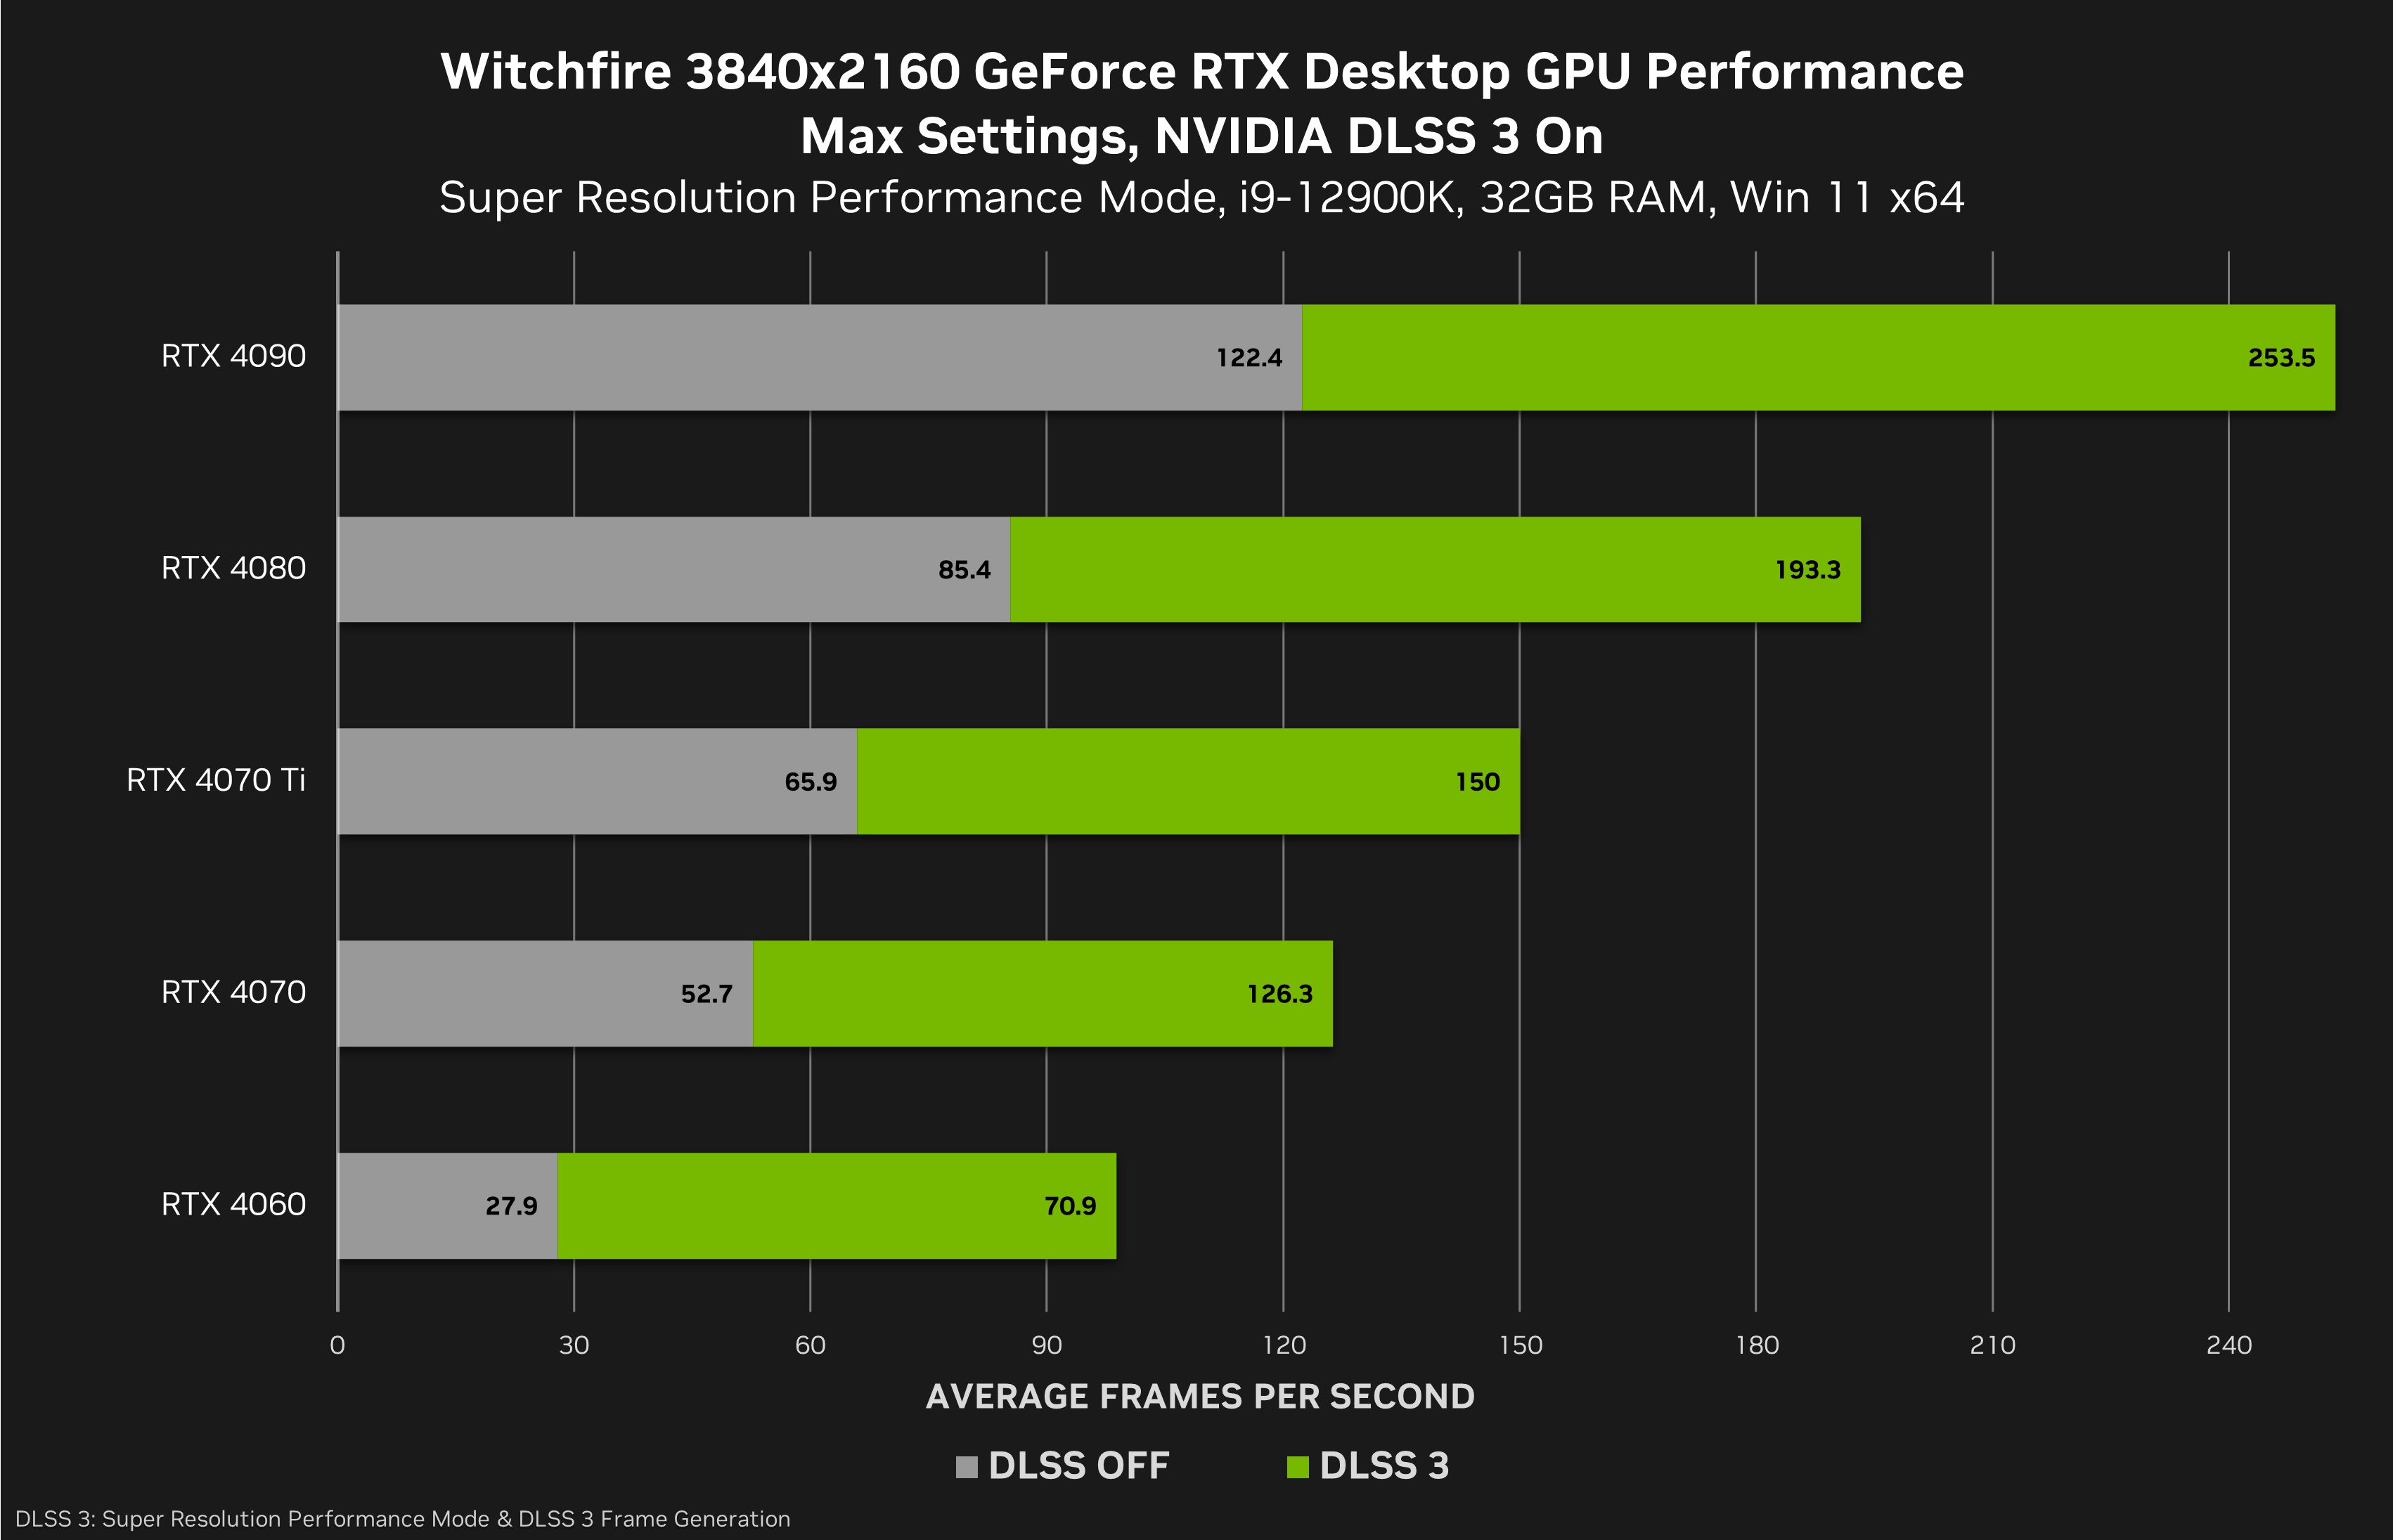 Cyberpunk 2077 Ray Tracing Overdrive benchmark on 4080 Laptop :  r/GamingLaptops